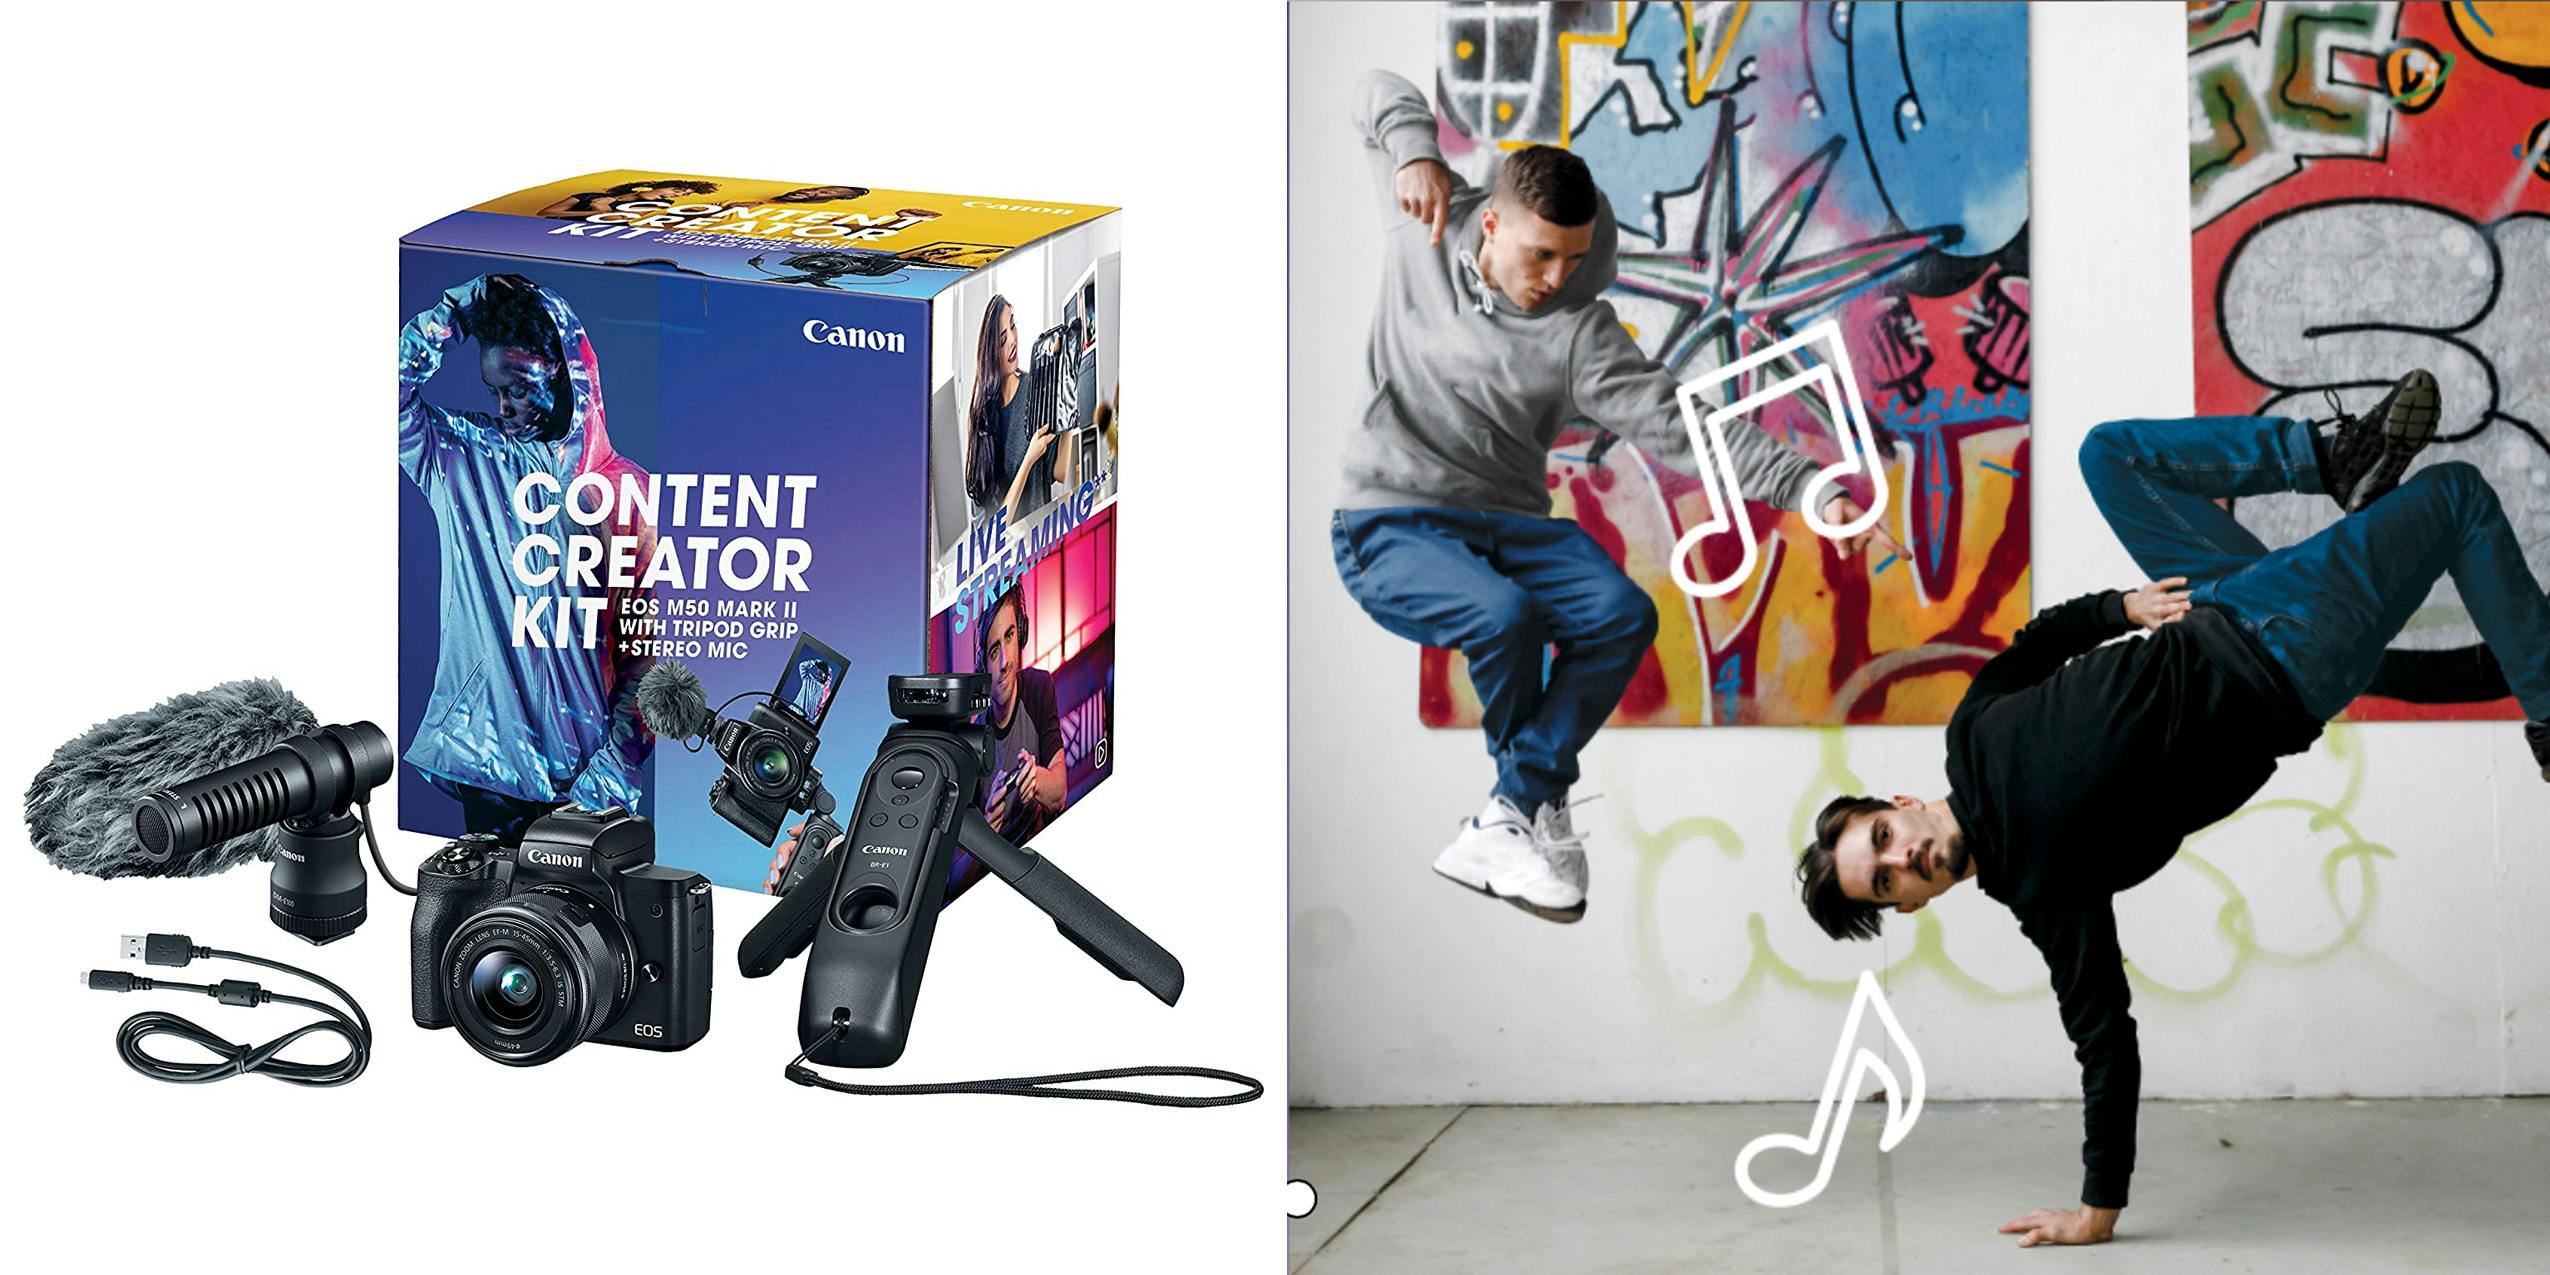 Canon Content Creator Kit along with dancers using the device.